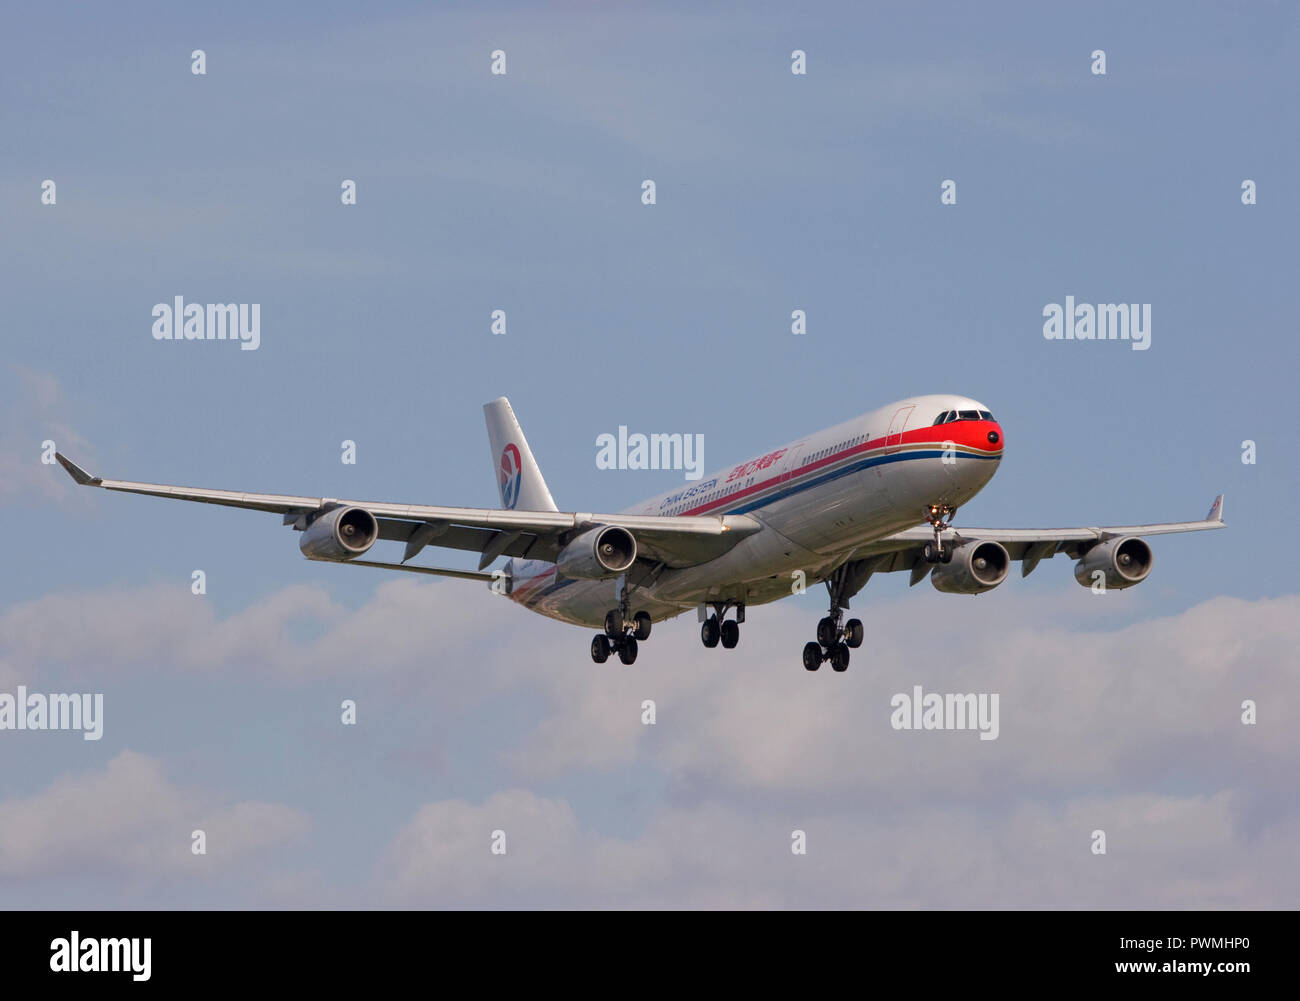 China Eastern Airlines Airbus A340-313X landing at London Heathrow airport. Stock Photo